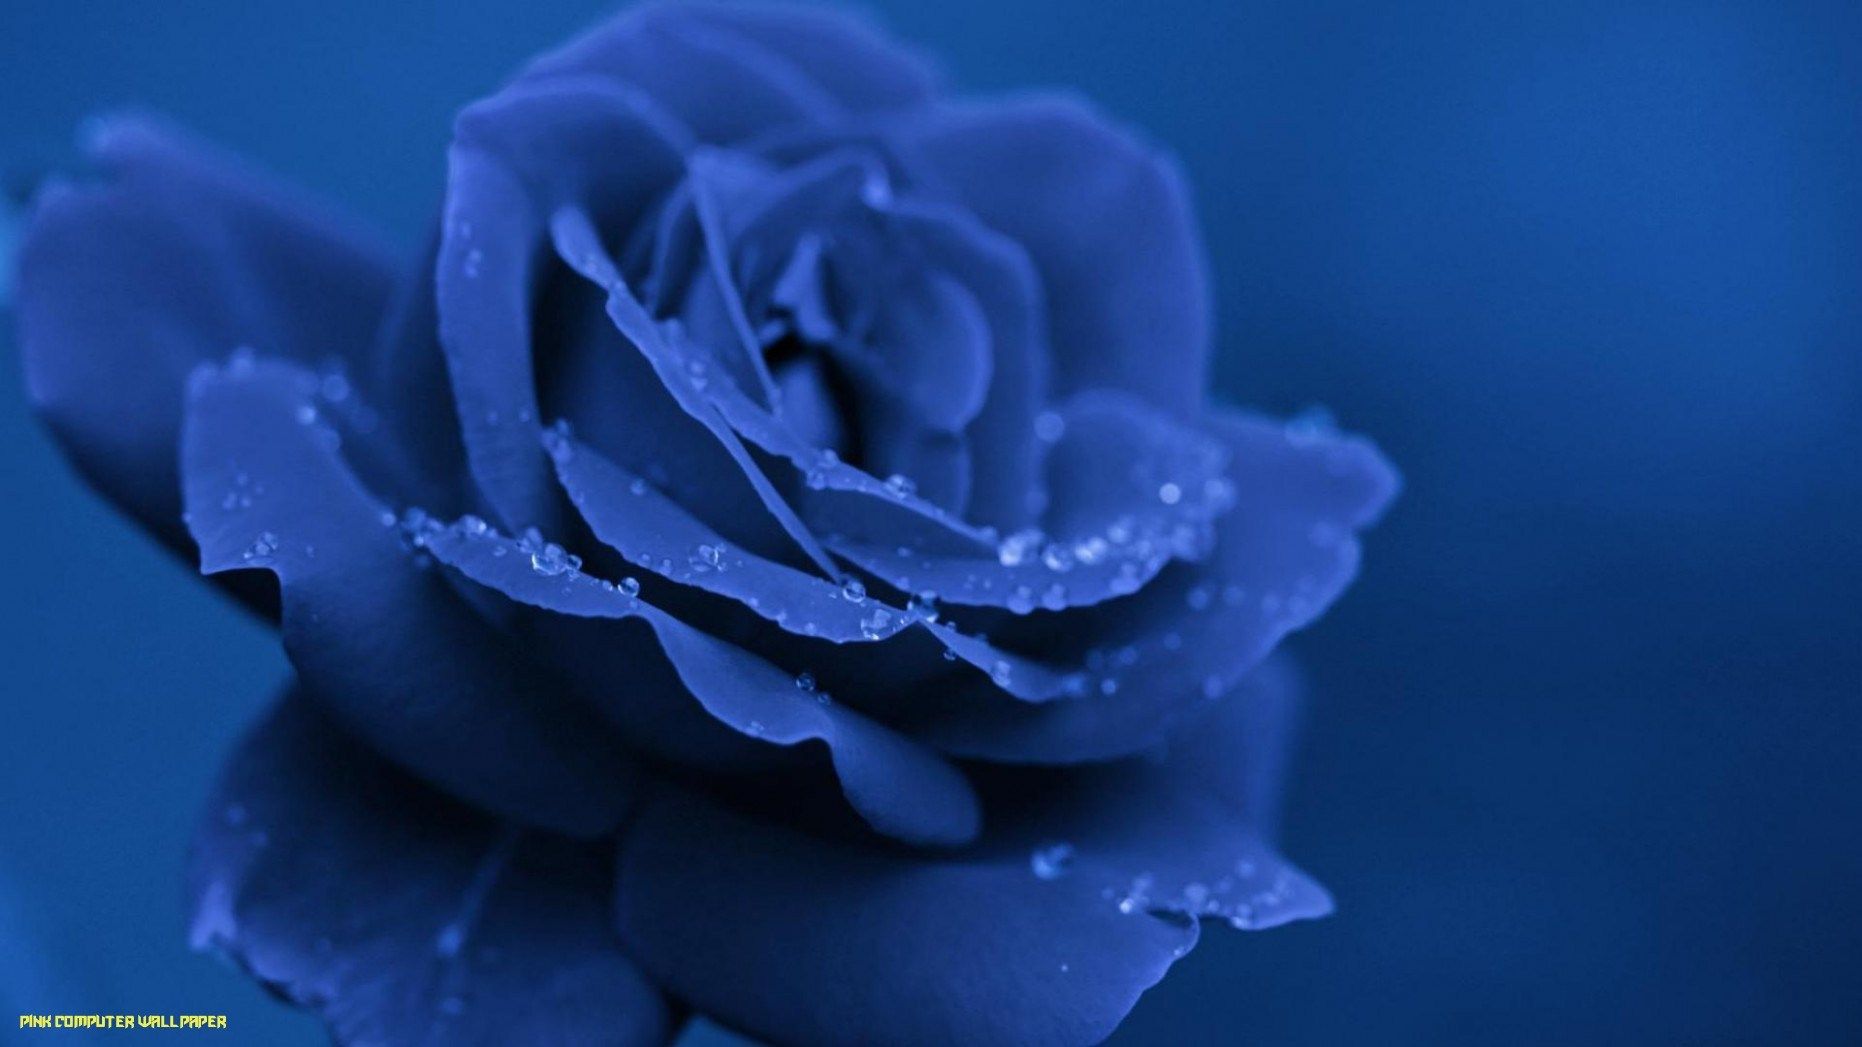 Blue Rose Wallpaper Image Photo Picture Background